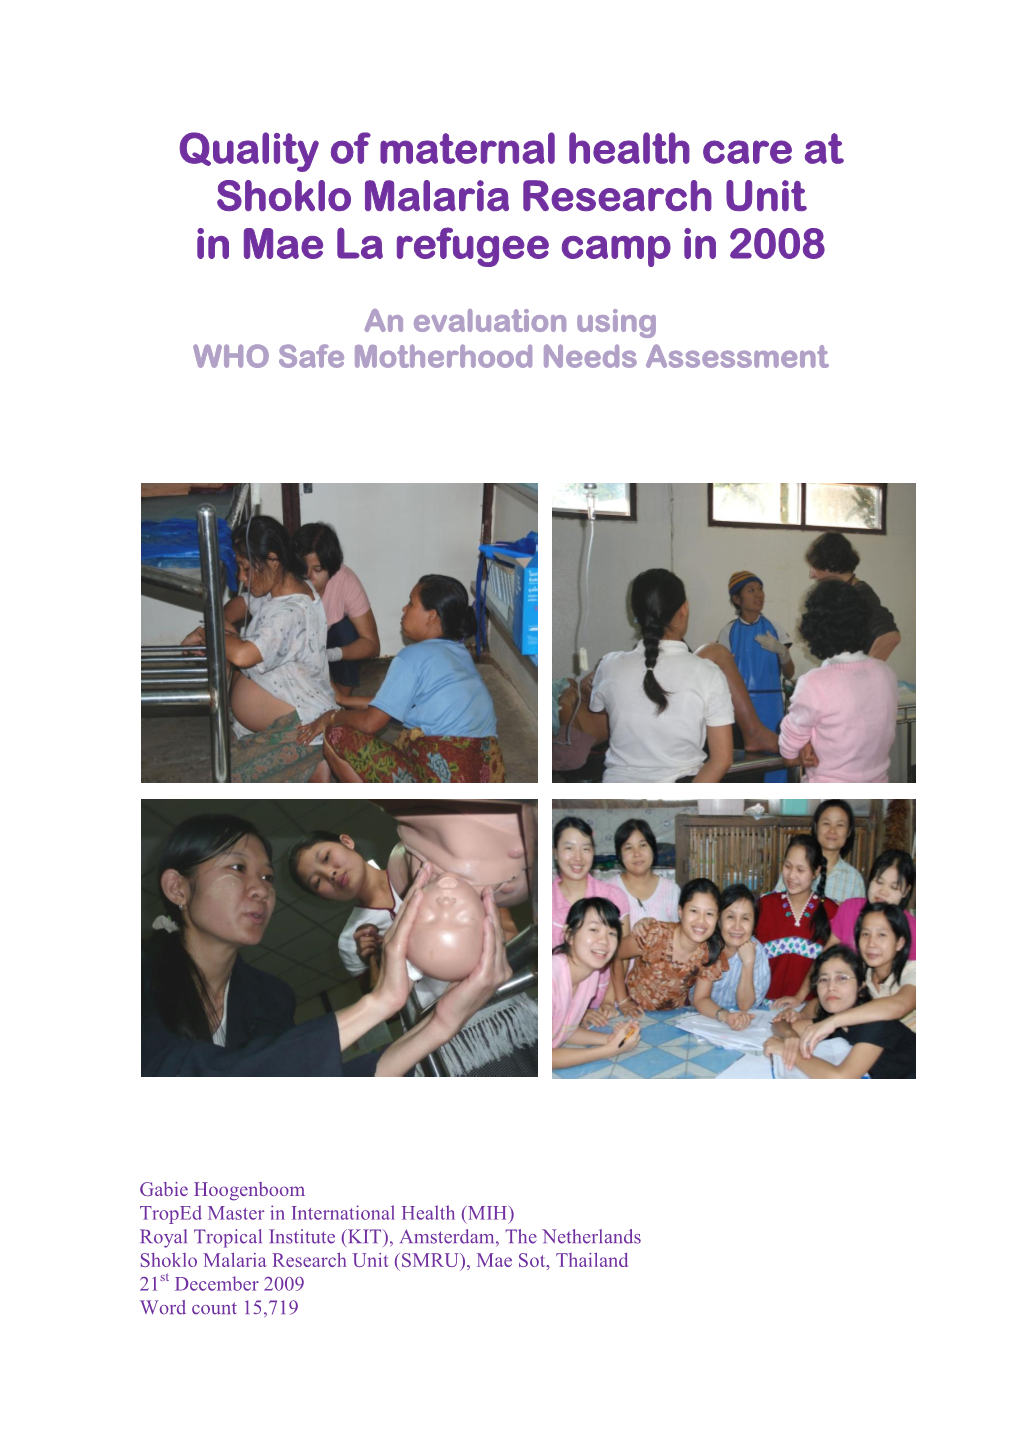 Quality of Maternal Health Care at Shoklo Malaria Research Unit in Mae La Refugee Camp in 2008